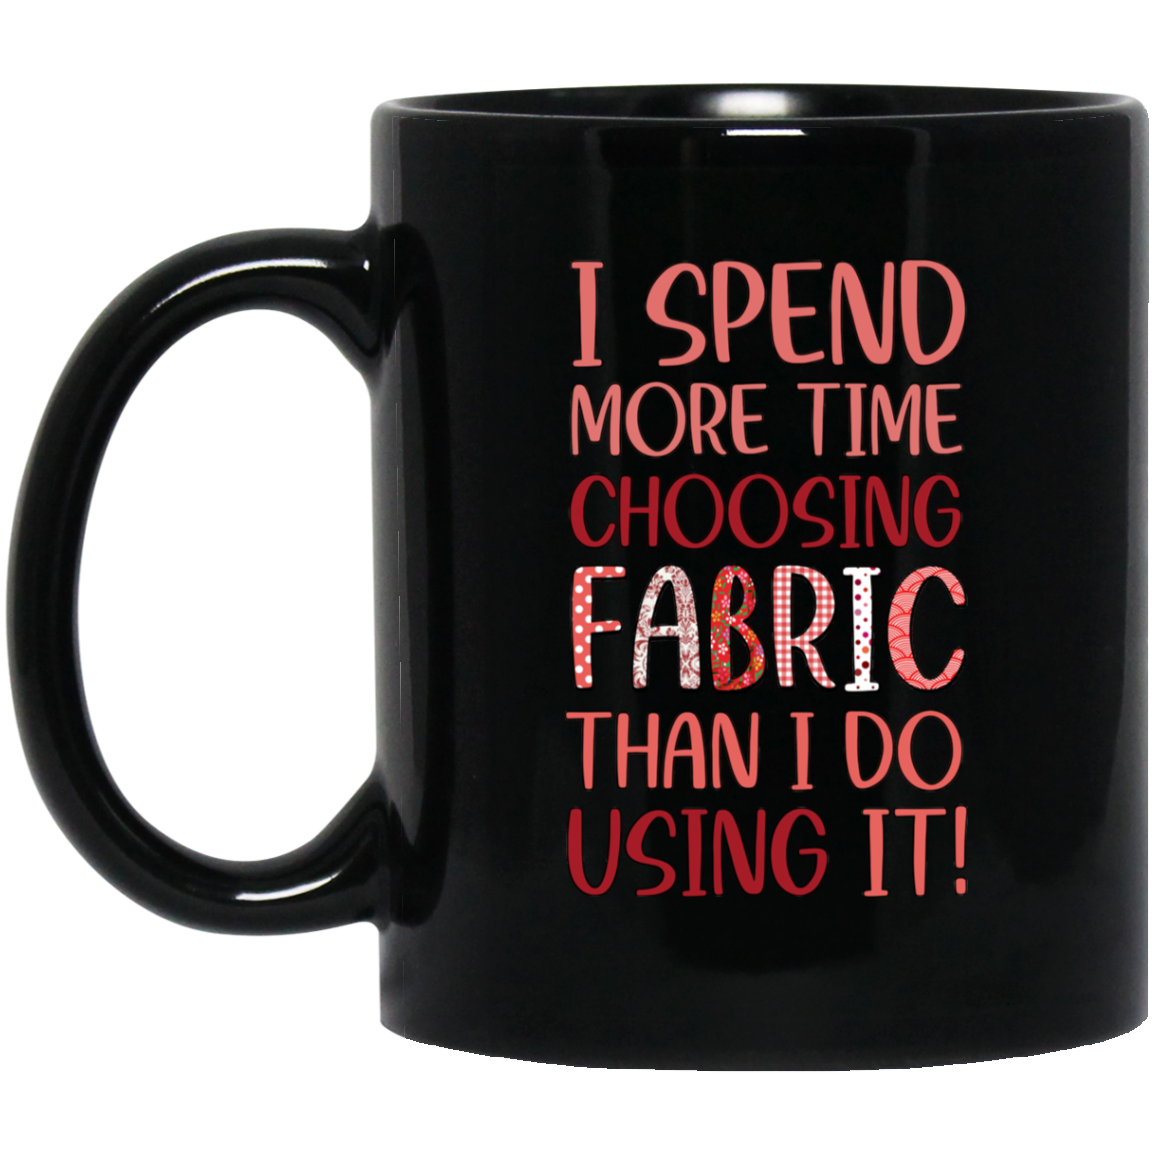 I Spend More Time Choosing Fabric